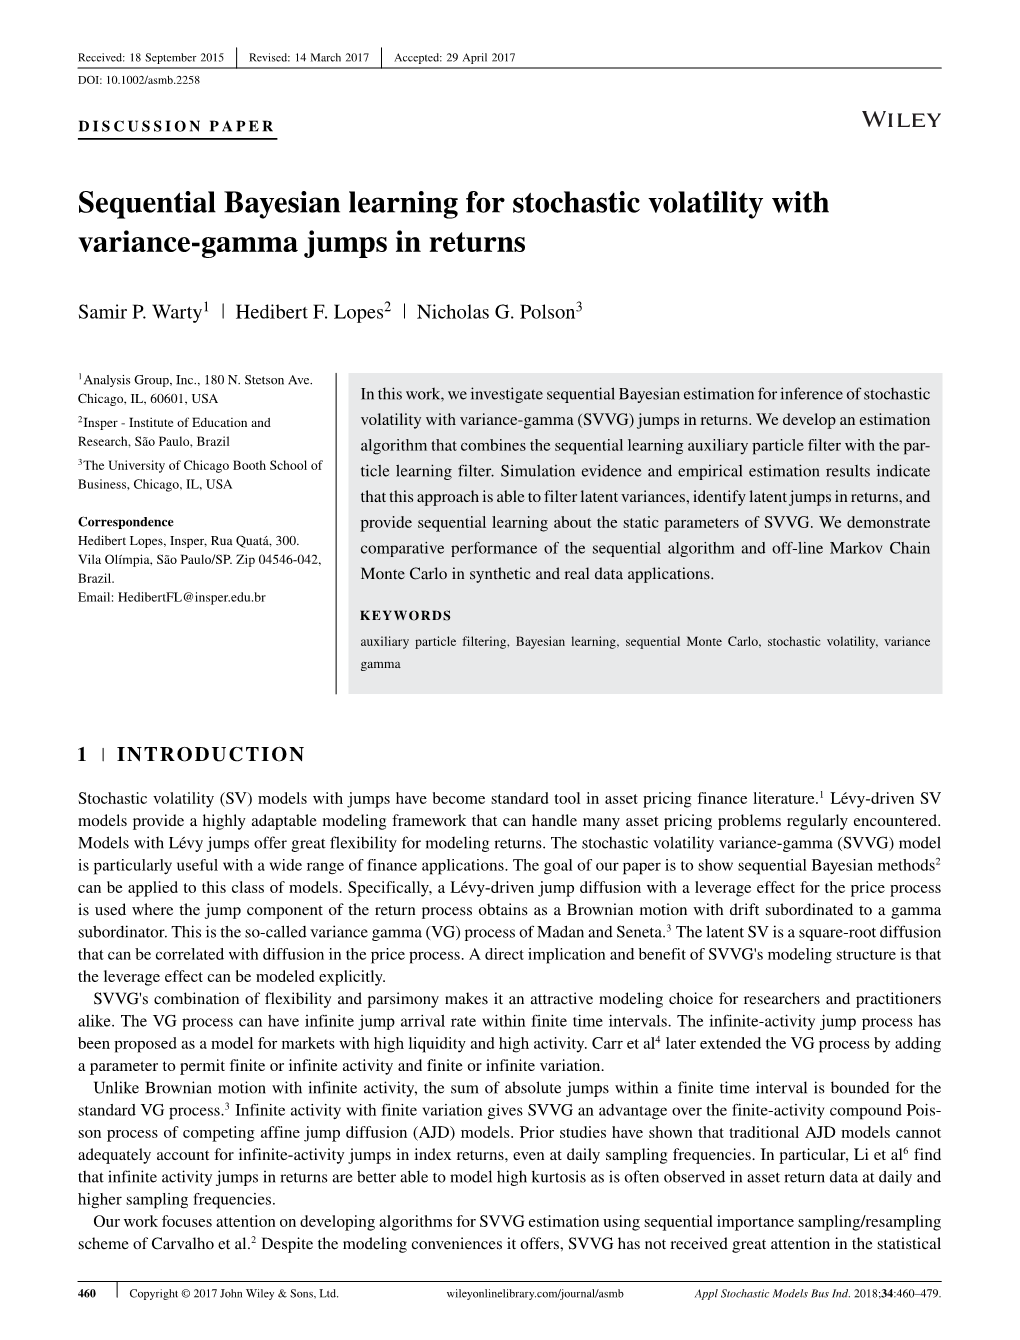 Sequential Bayesian Learning for Stochastic Volatility with Variance-Gamma Jumps in Returns